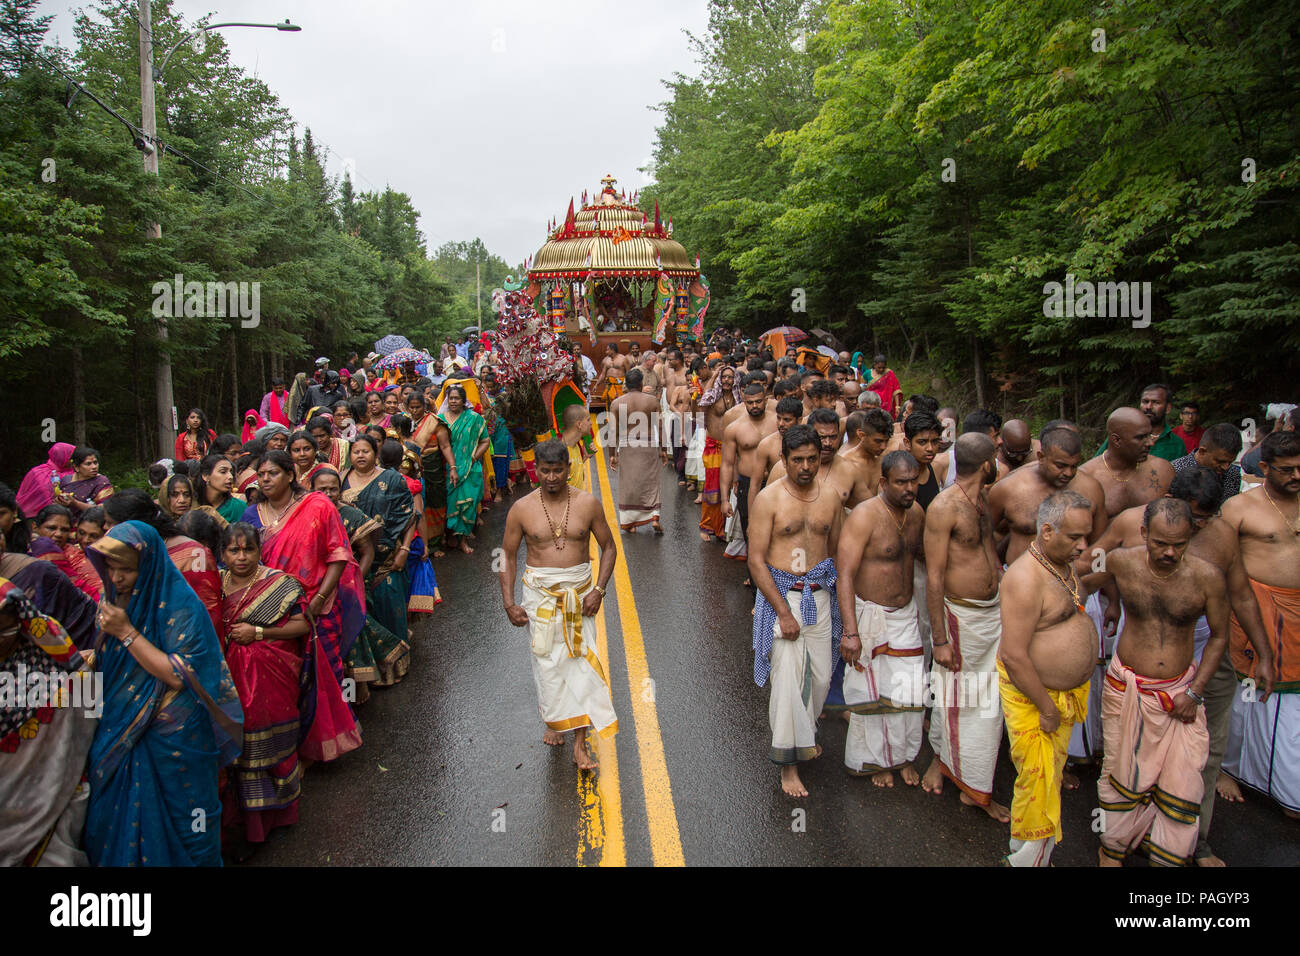 Val-Morin, Canada, July 22, 2018. Hundreds of Hindu devotees gathered in Val-Morin, Quebec, for the Kaavadi festival, an annual celebration of Lord Subramanya (or Muruga), the Hindu god of war. Several devotees are suspended by hooks and needles piercing their skin as a way o penance and transcendence. Other devotees carry kaavadis (arches adorned with peacock feathers) on their shoulders, as it is believed that they are great conductors of spiritual energy. Credit: Cristian Mijea/Alamy Live News. Stock Photo